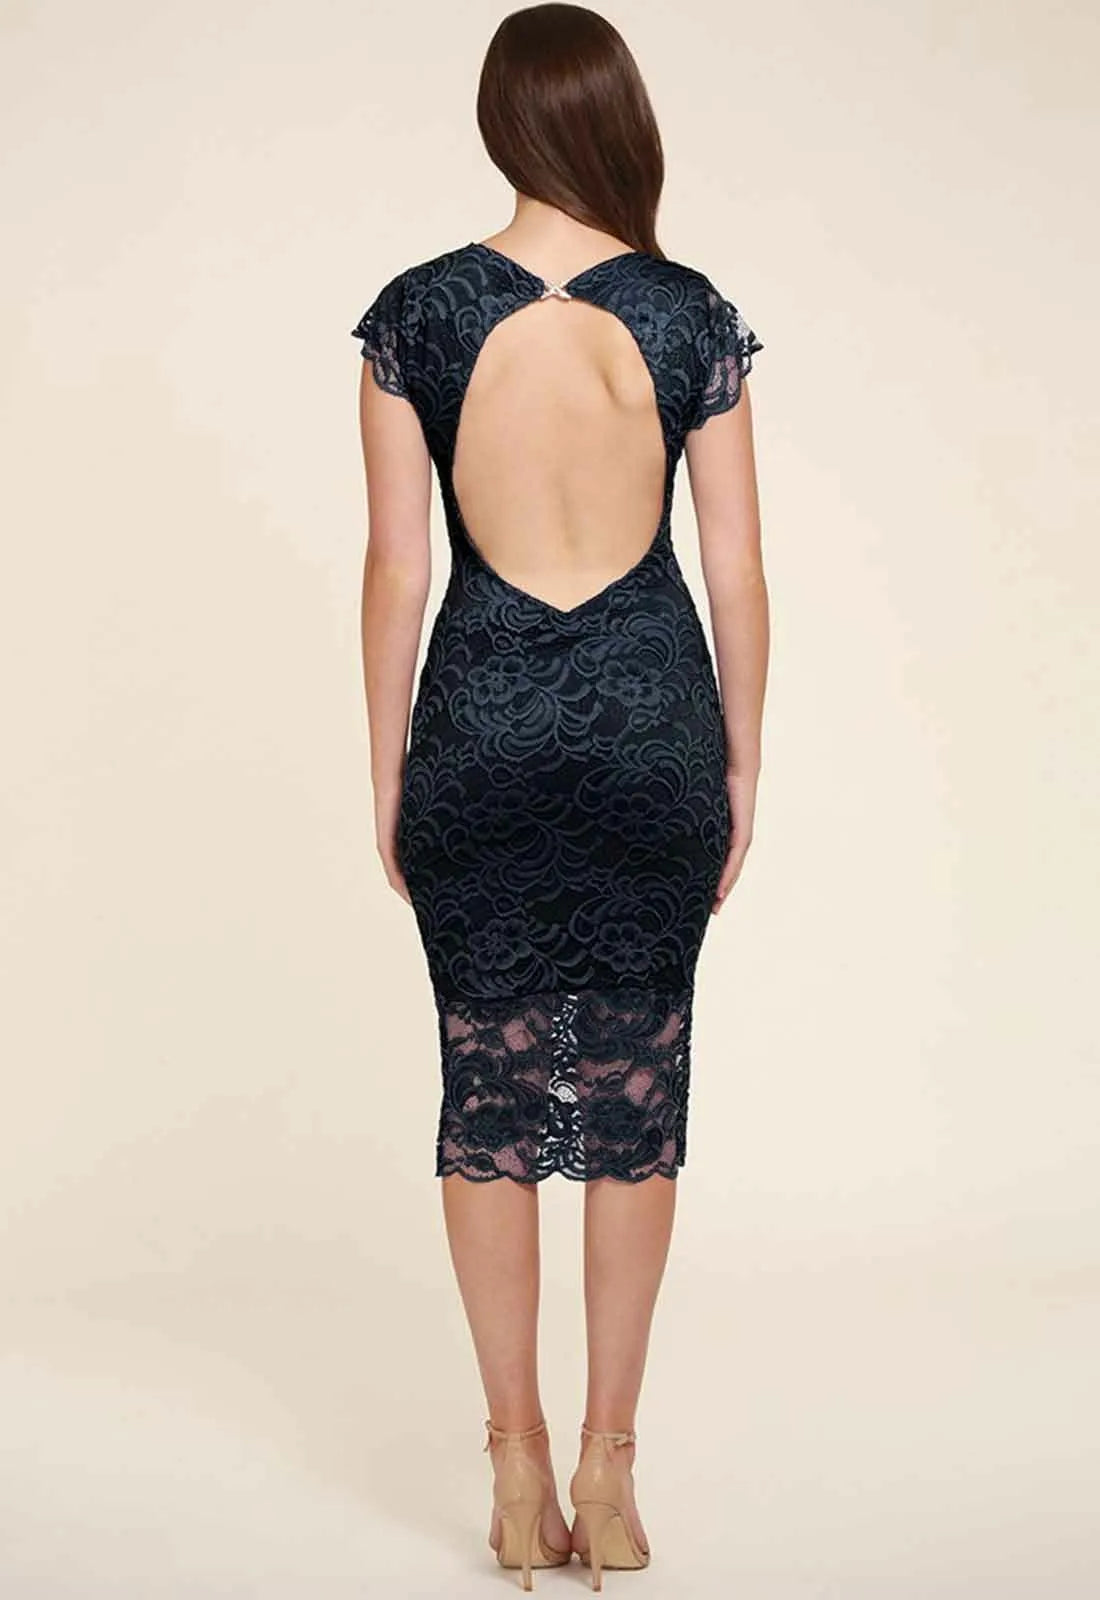 Honor Gold Faye Backless Lace Midi Dress in Navy-19556